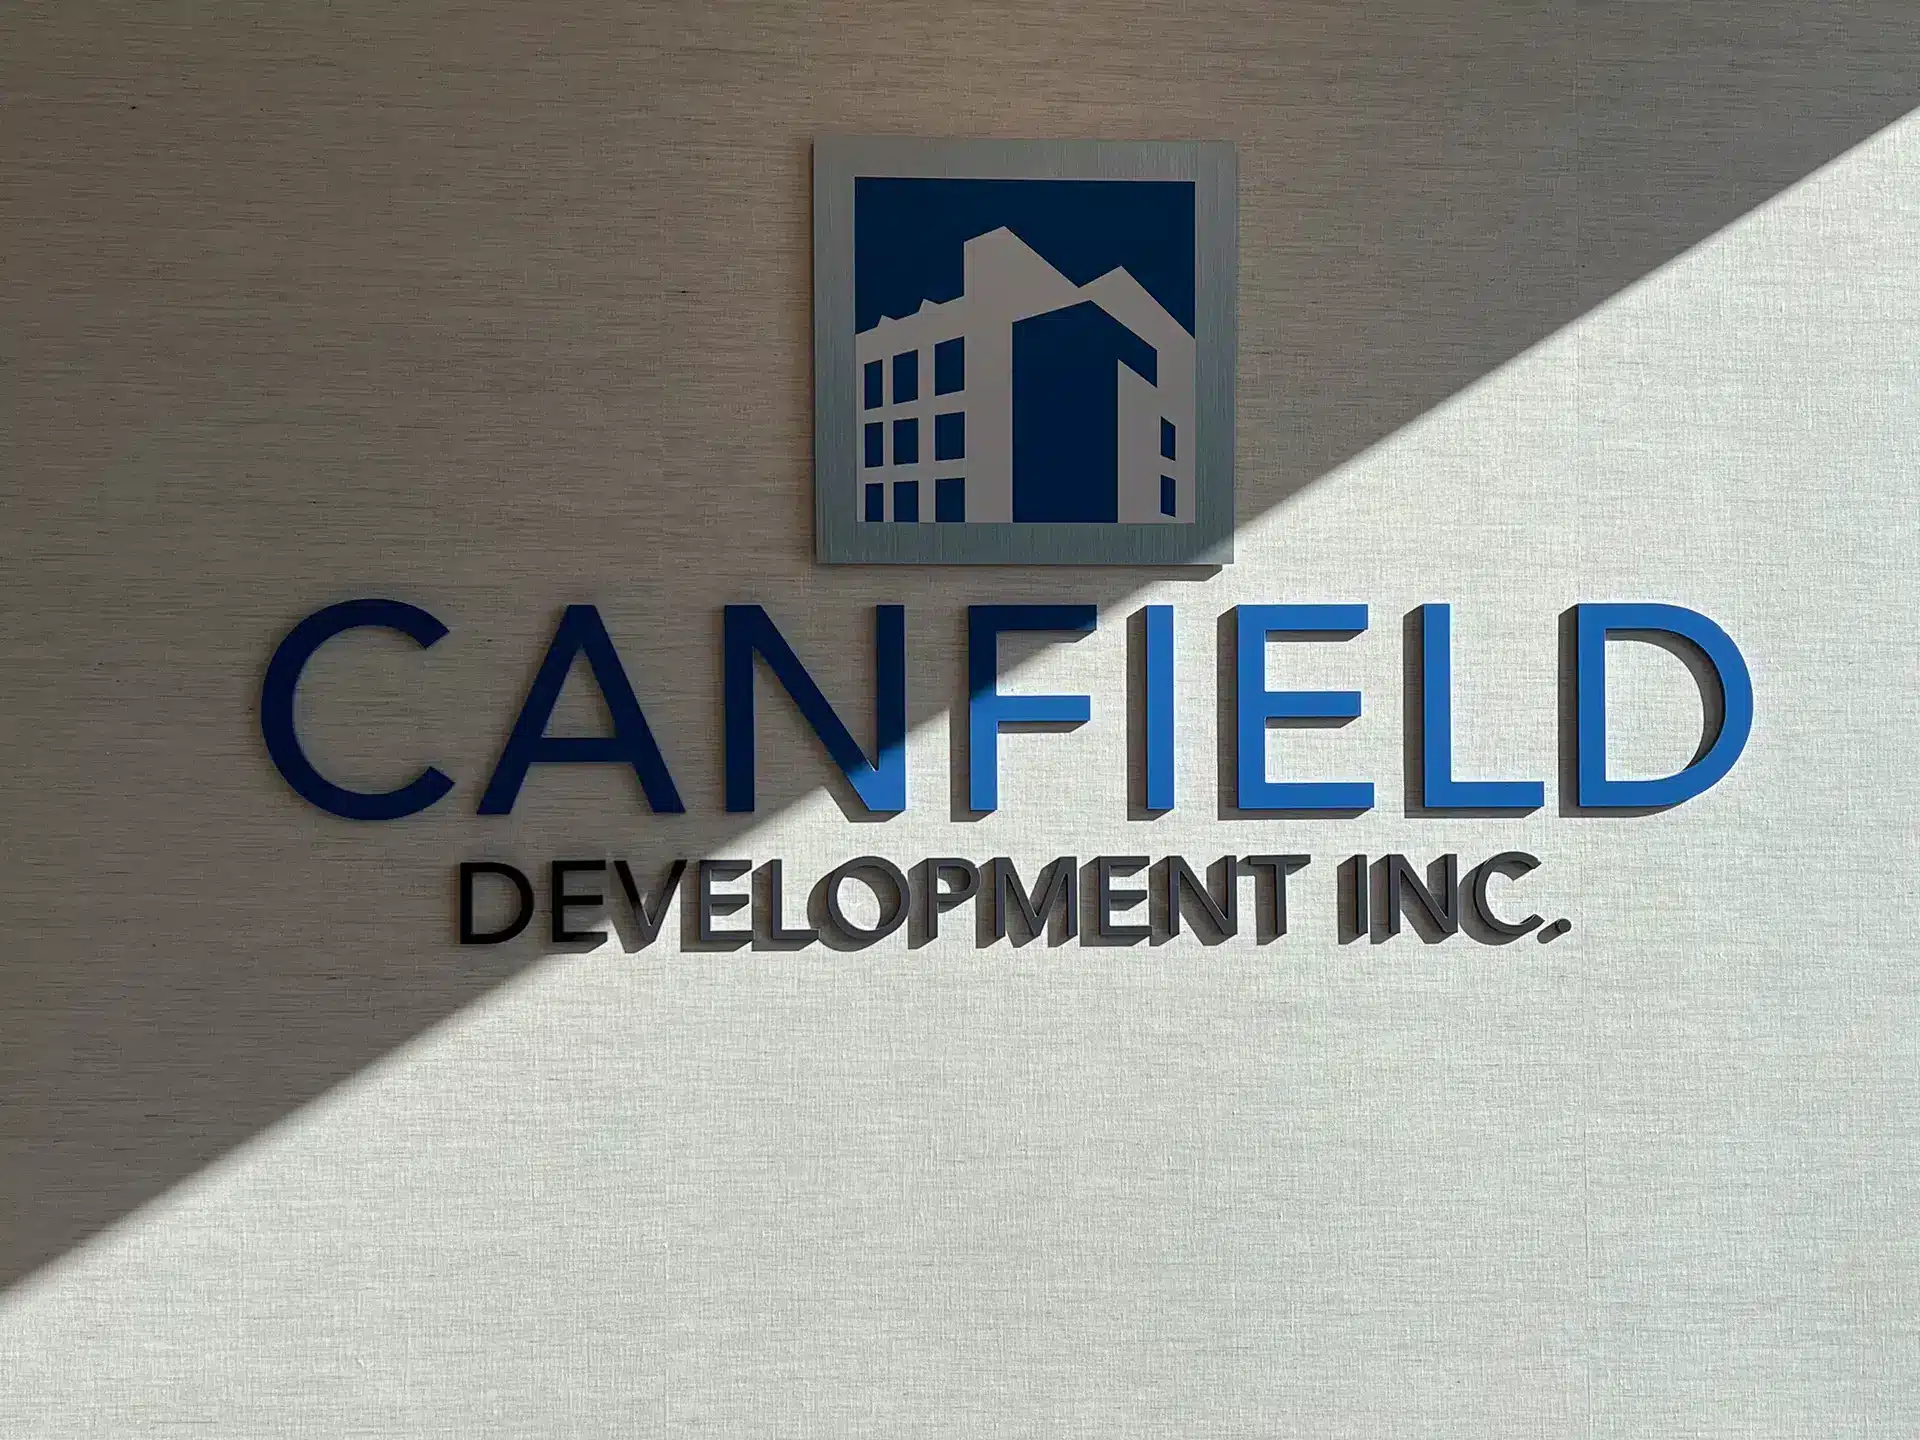 Canfield Development - dimensional business sign